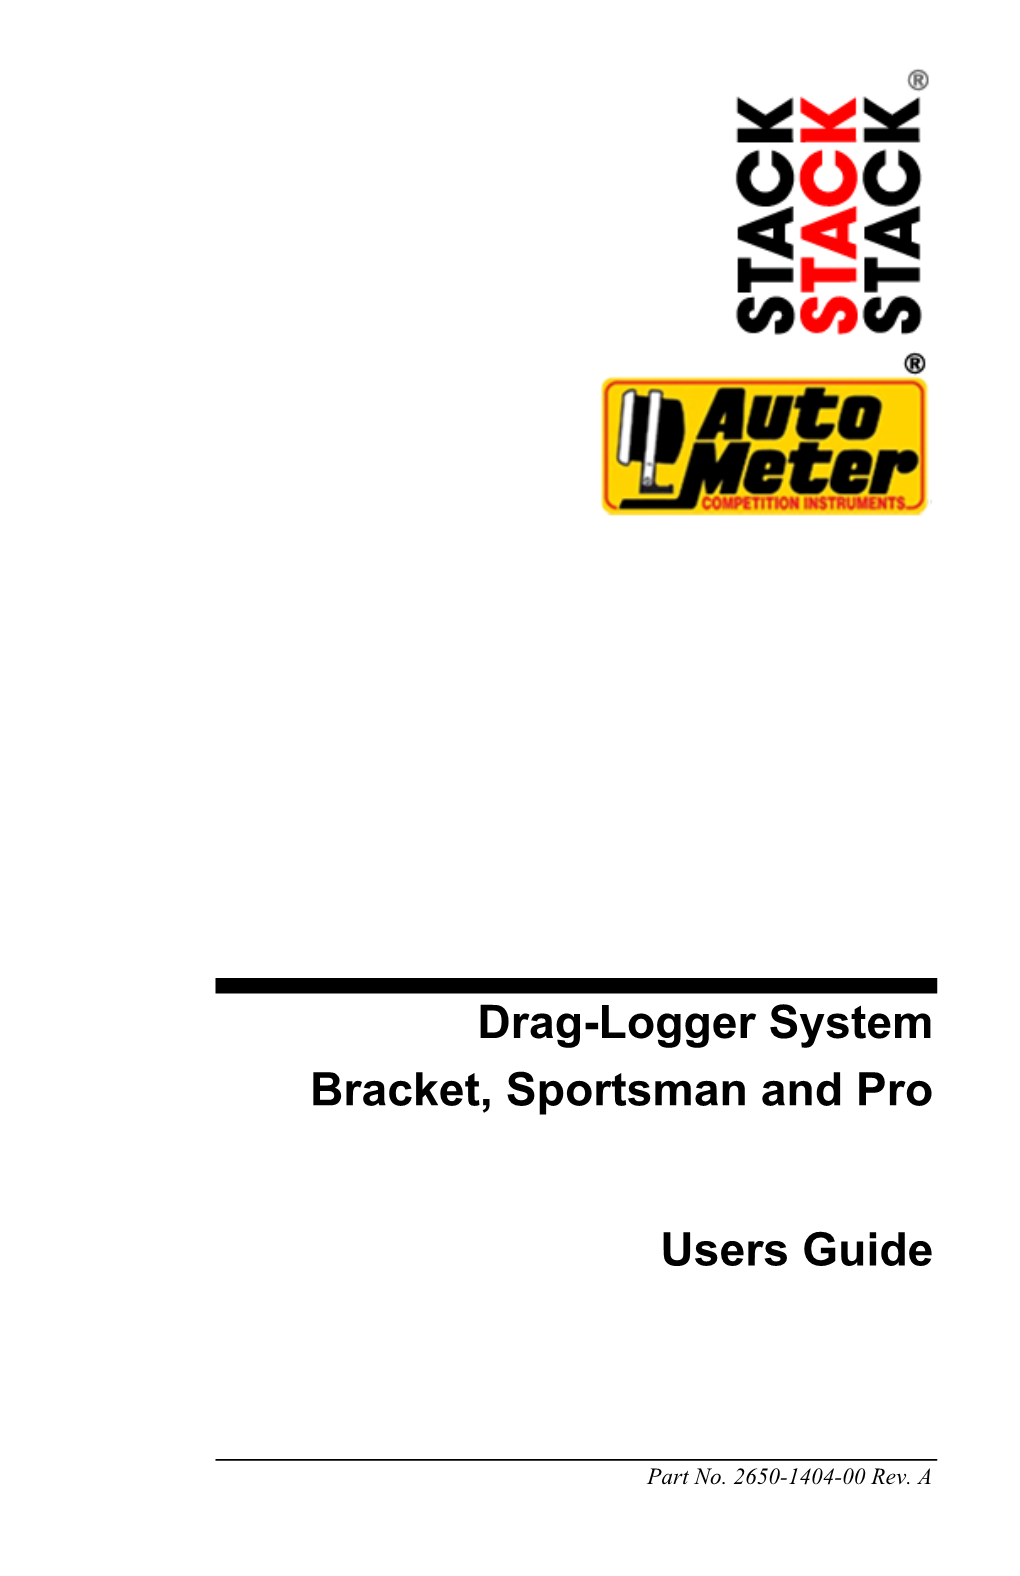 Drag-Logger System Bracket, Sportsman and Pro Users Guide